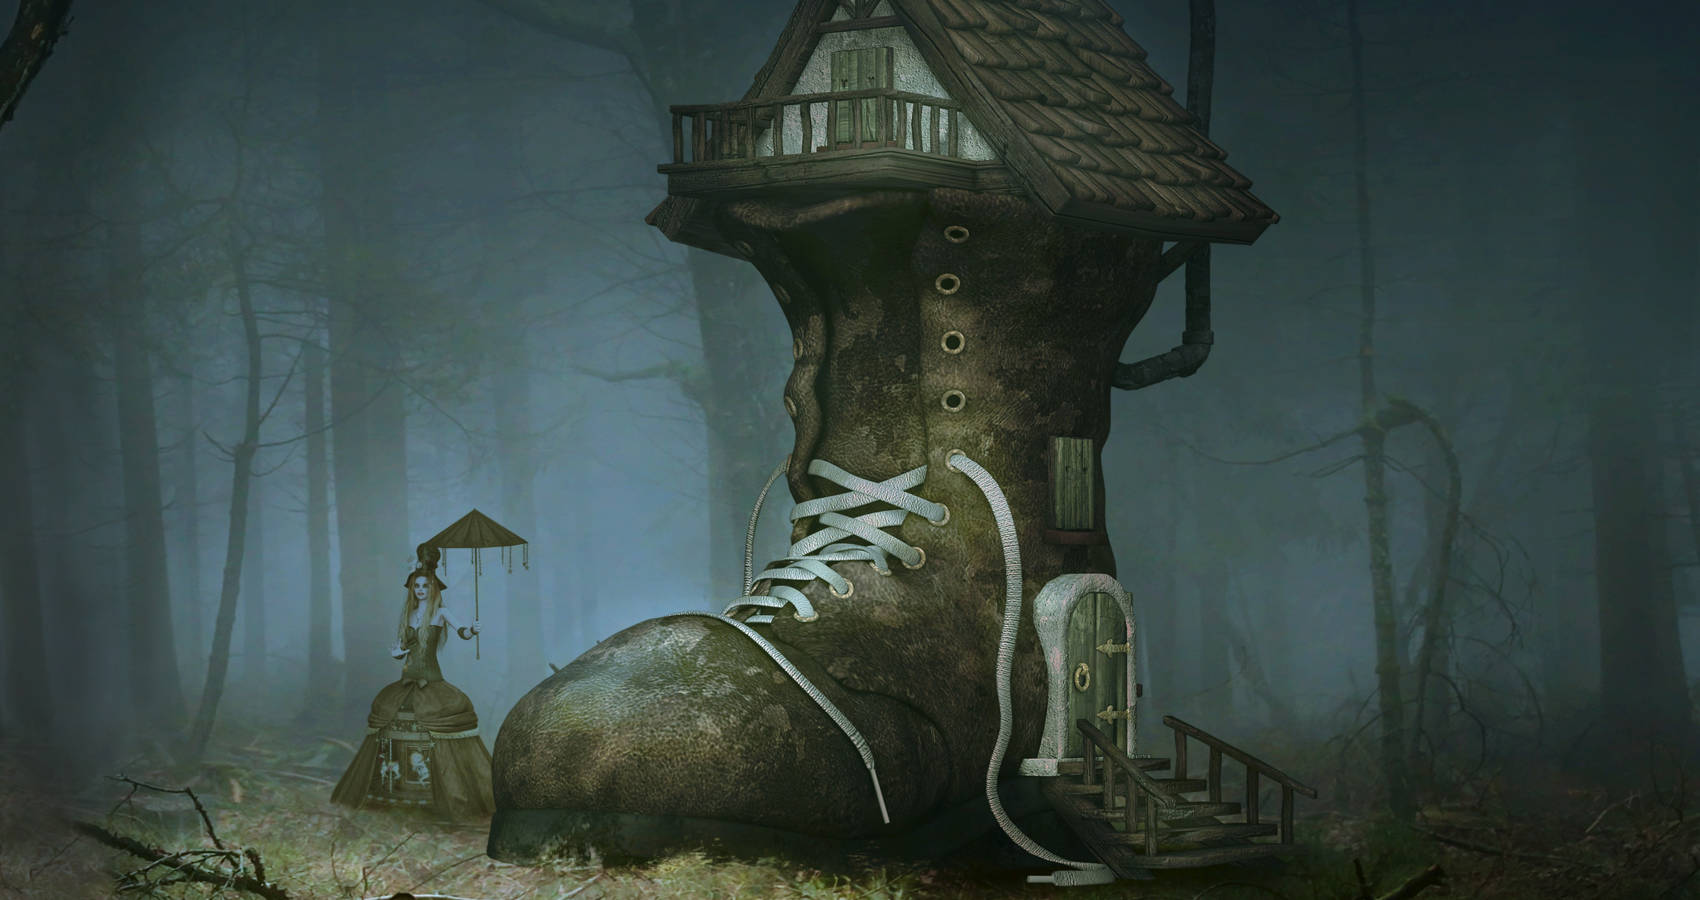 The Unappetizing Taste of Shoe-Leather, fantasy by L.M. Lydon at Spillwords.com